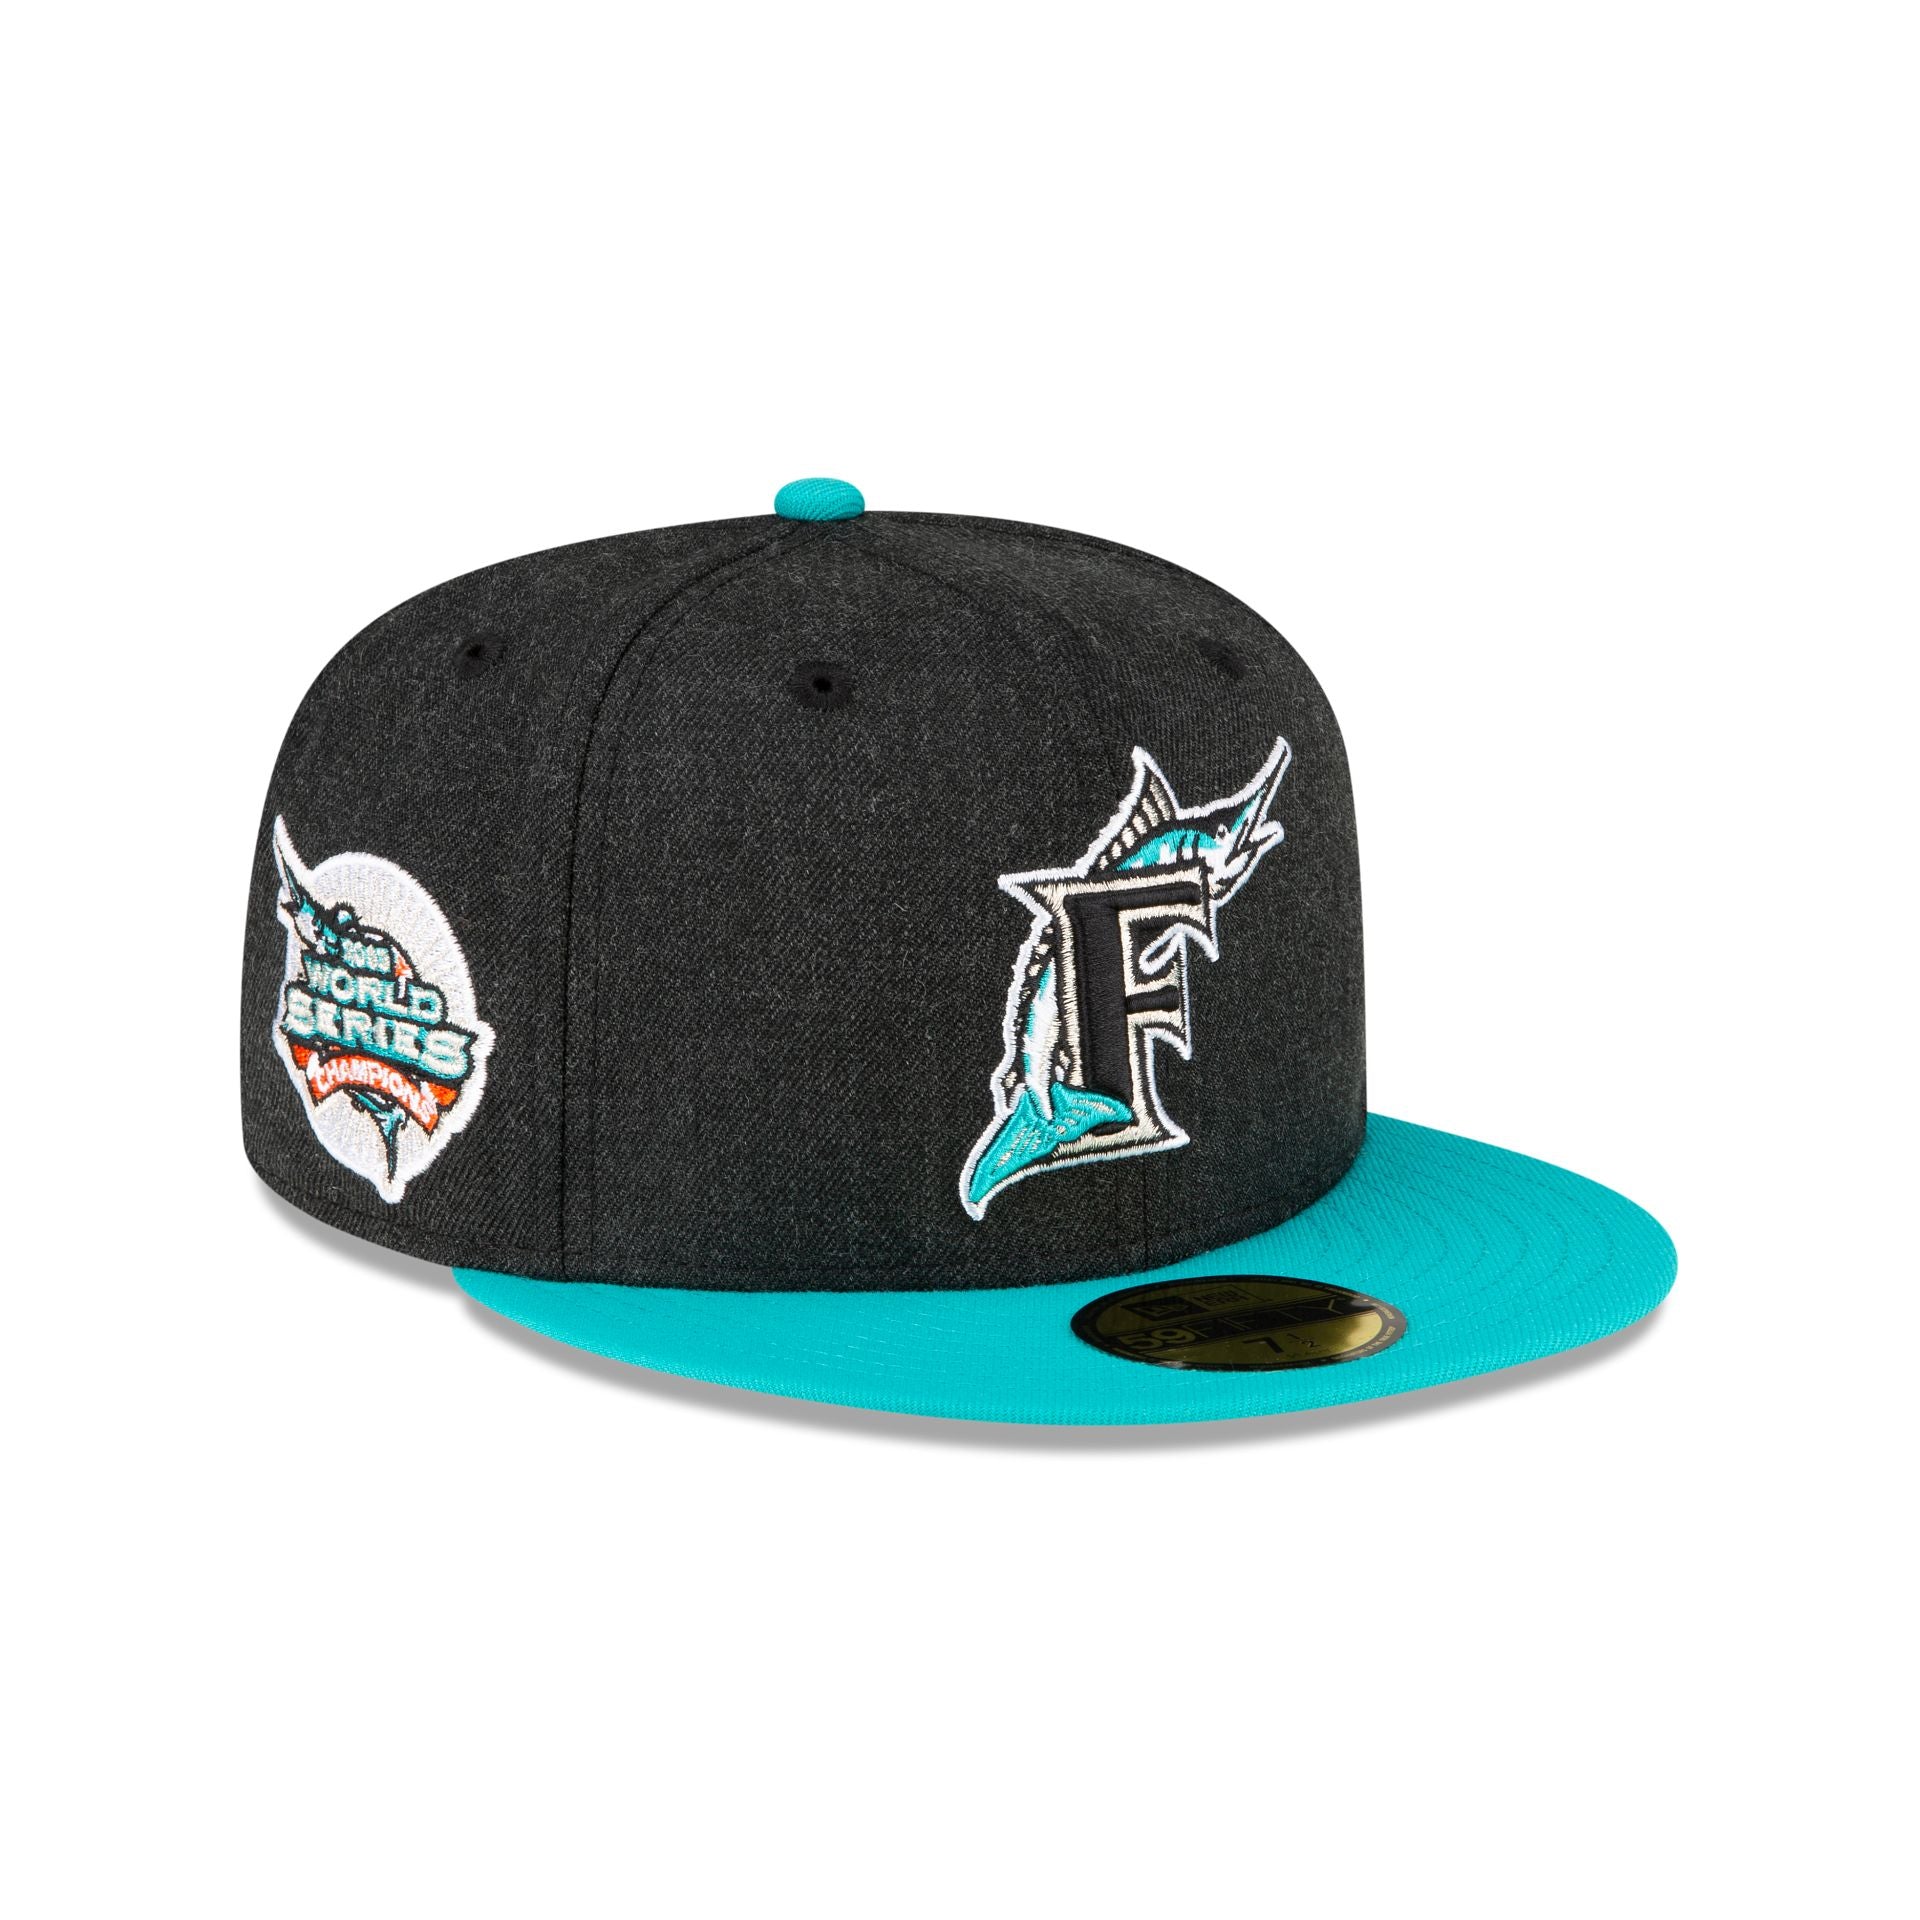 Just Caps Heathered Crown Miami Marlins 59FIFTY Fitted Hat – New Era Cap